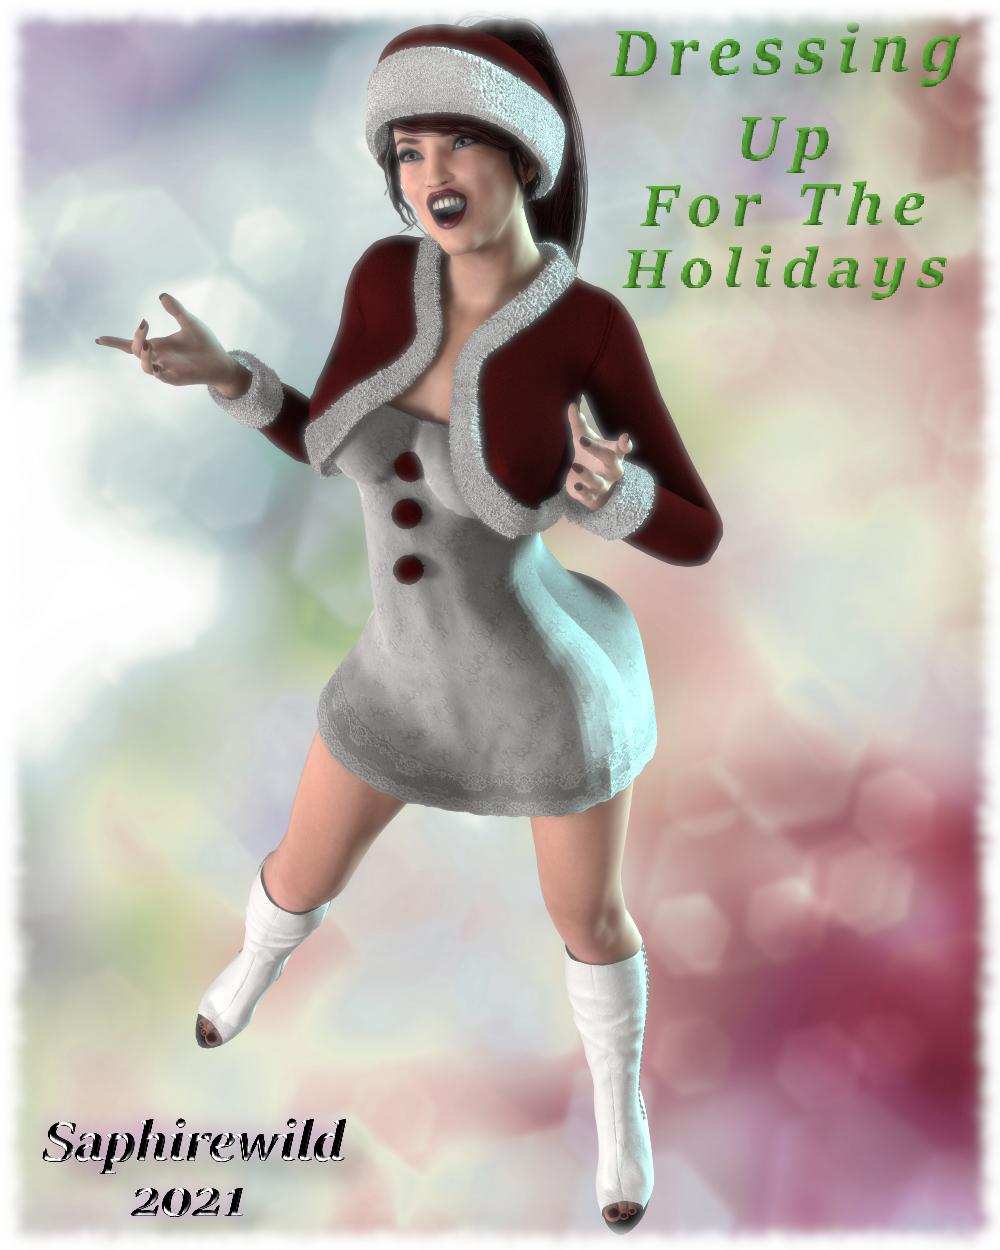 3D Art Freebie Challenge December 2021-"Dressing Up For The Holidays"  -Entries Thread Only - Daz 3D Forums